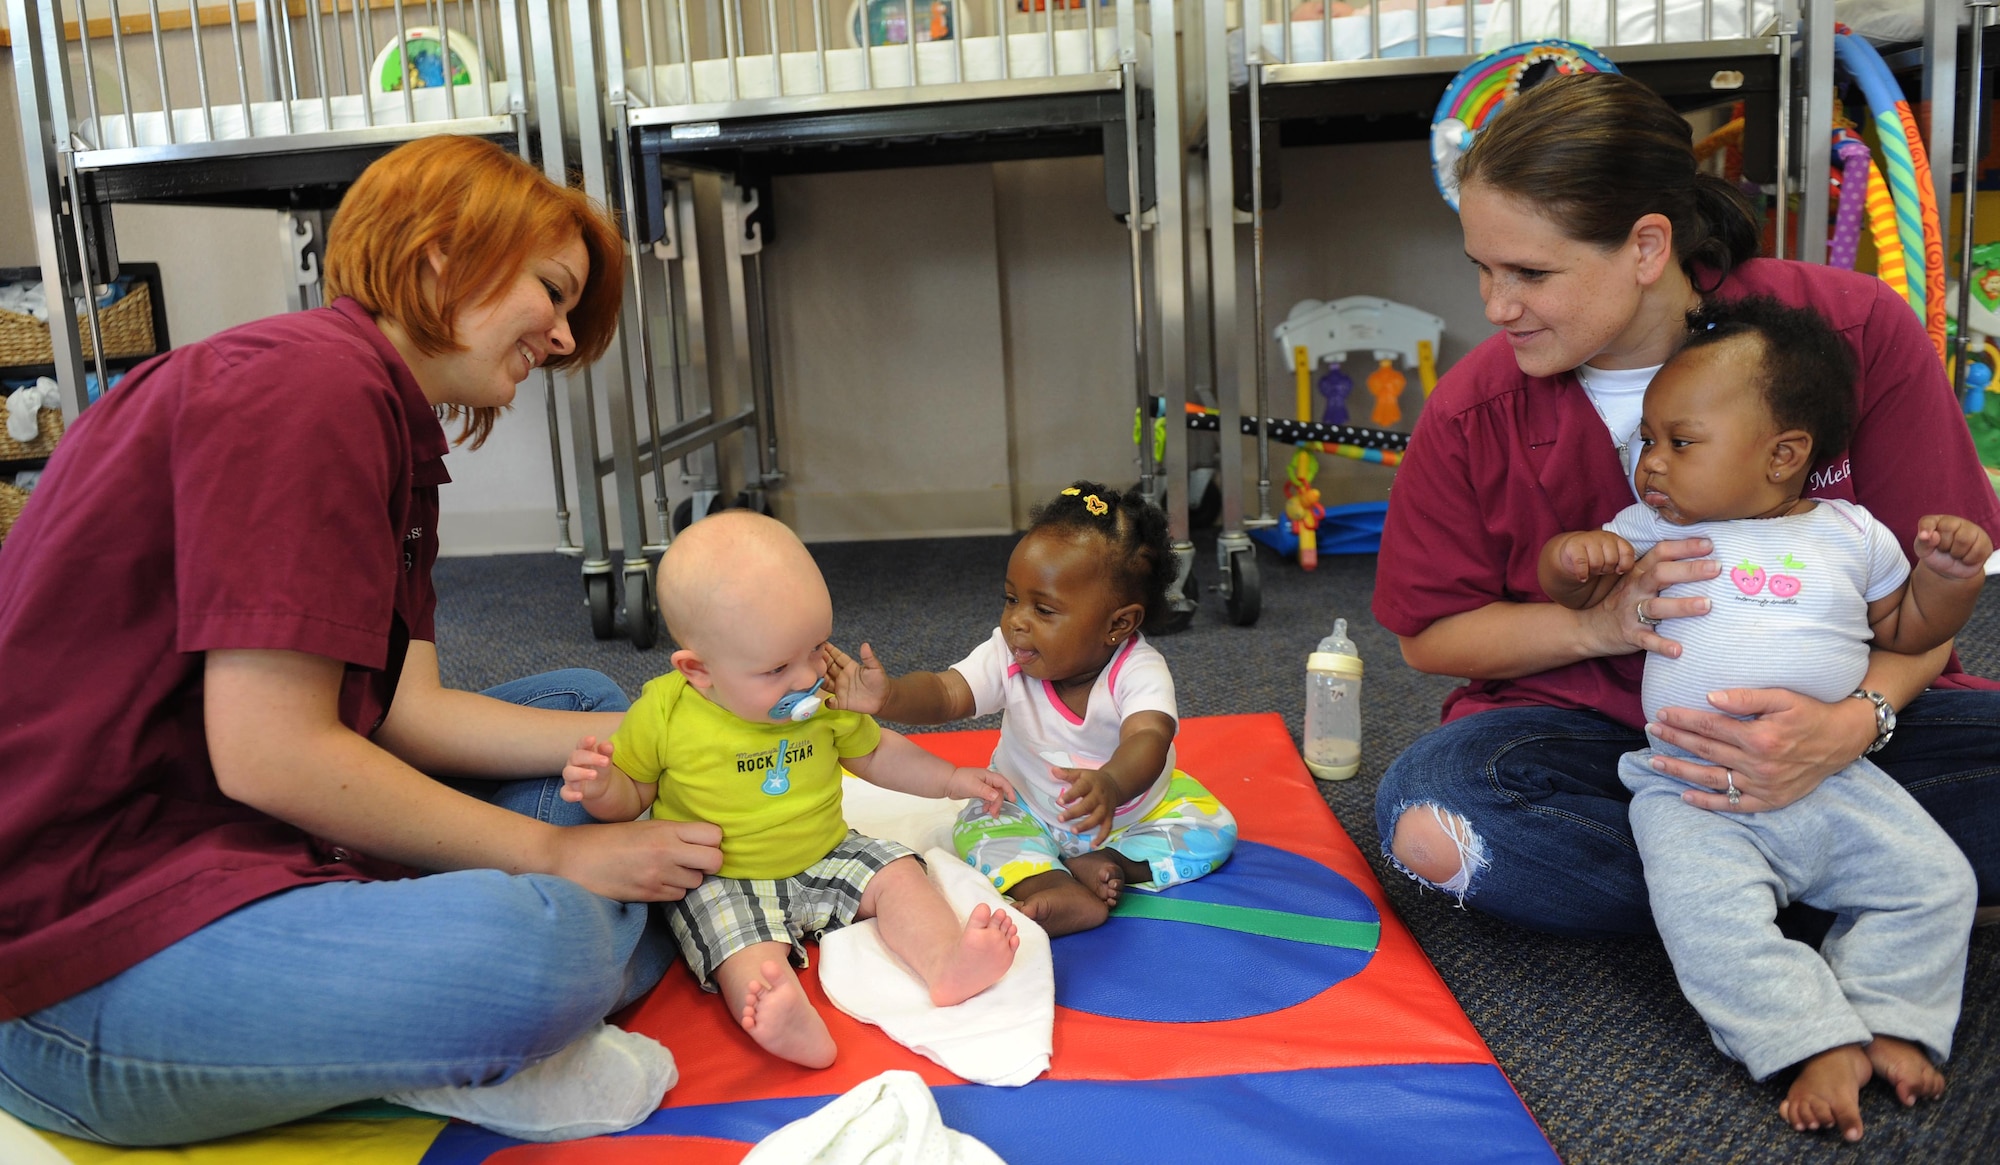 Melissa Bryant and Melissa Grice, both room lead teachers, play with infants July 10, at Little Rock Air Force Base Ark. The infant room takes six week to one year olds for military and non-military parents who work at Little Rock Air Force Base. (U.S. Air Force photo by Airman 1st Class Ellora Remington)